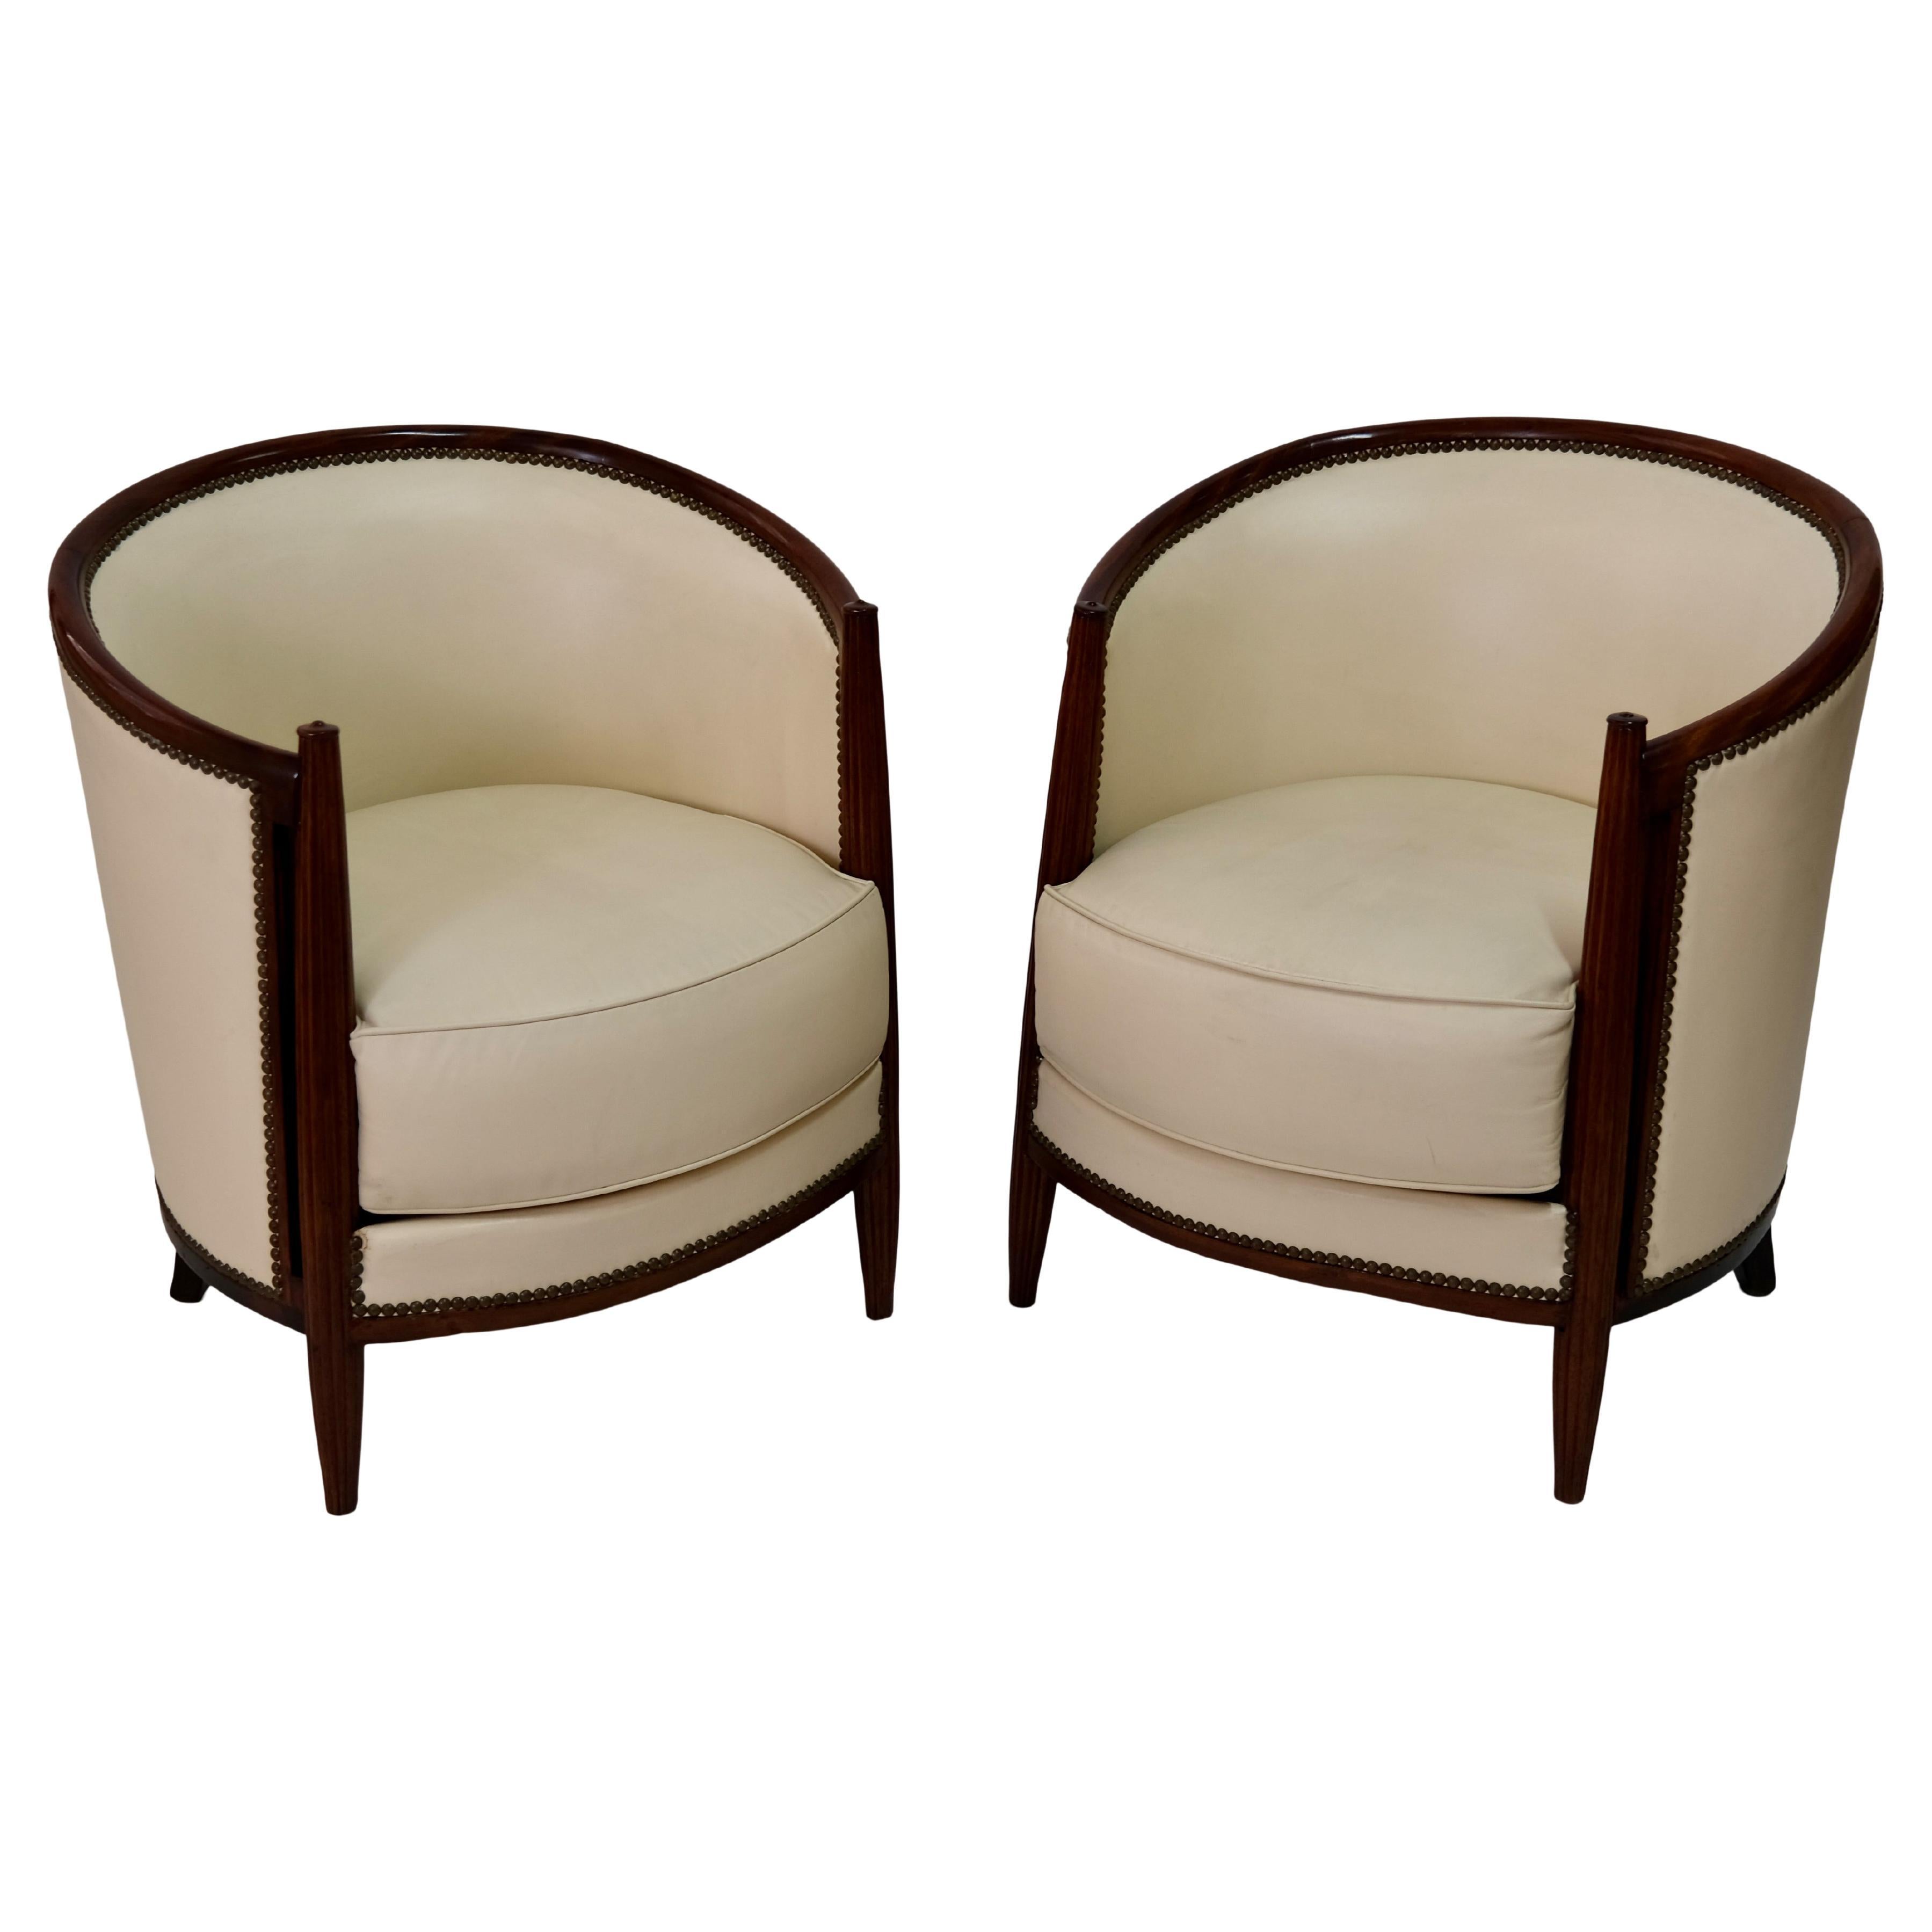 Set of 2 Early French Art Deco Club Chairs in Mahogany and Leather, circa 1925